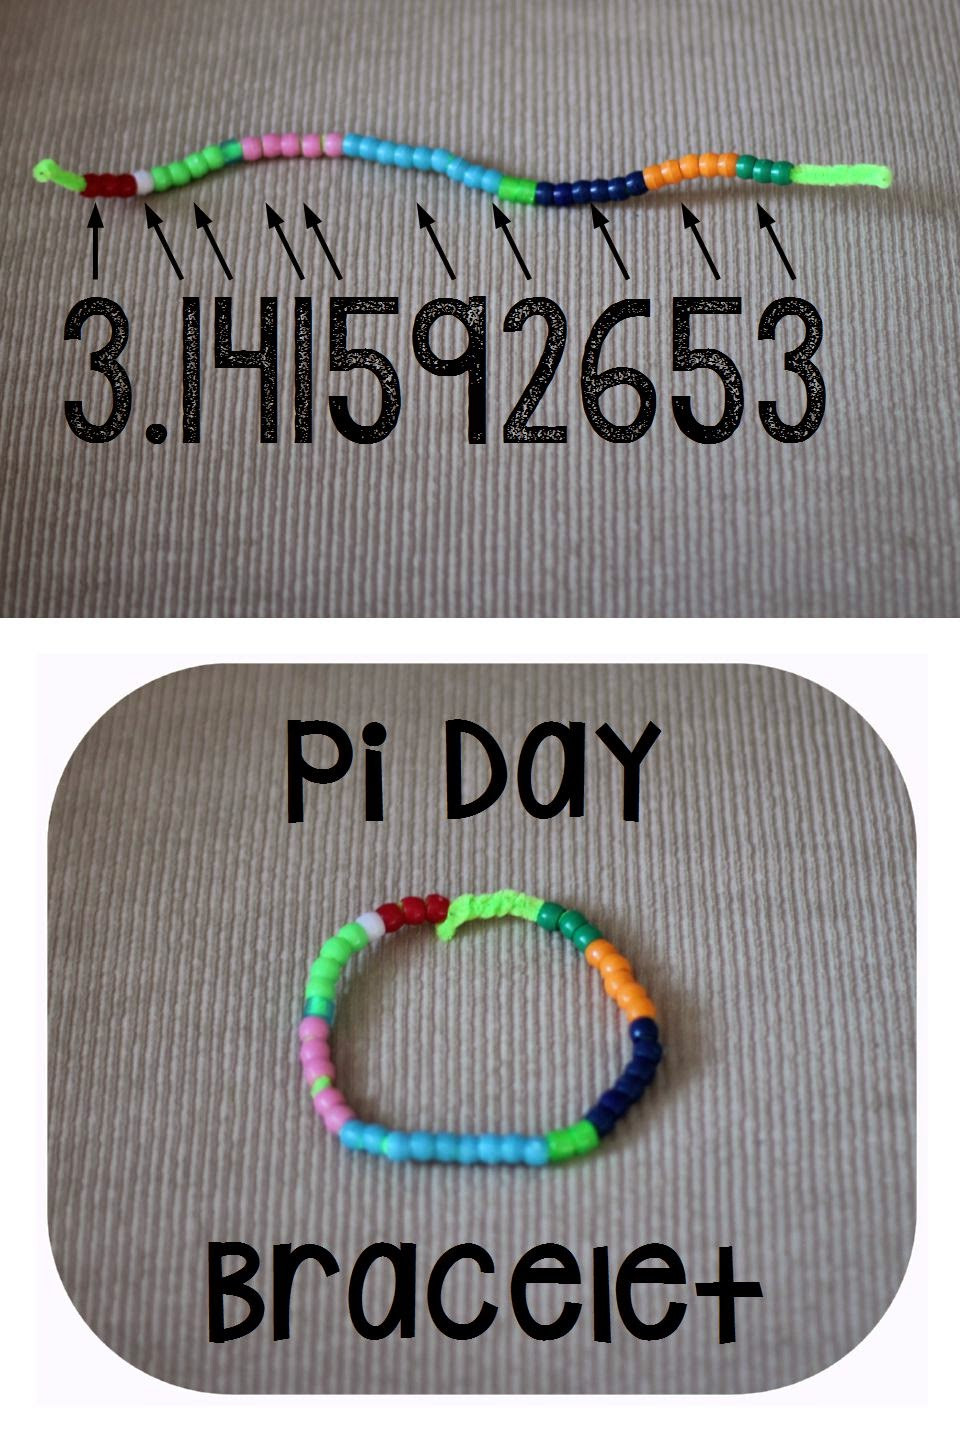 Pi Day Worksheets Activities
 Pi Day is on its way Pi Day Activities momgineer